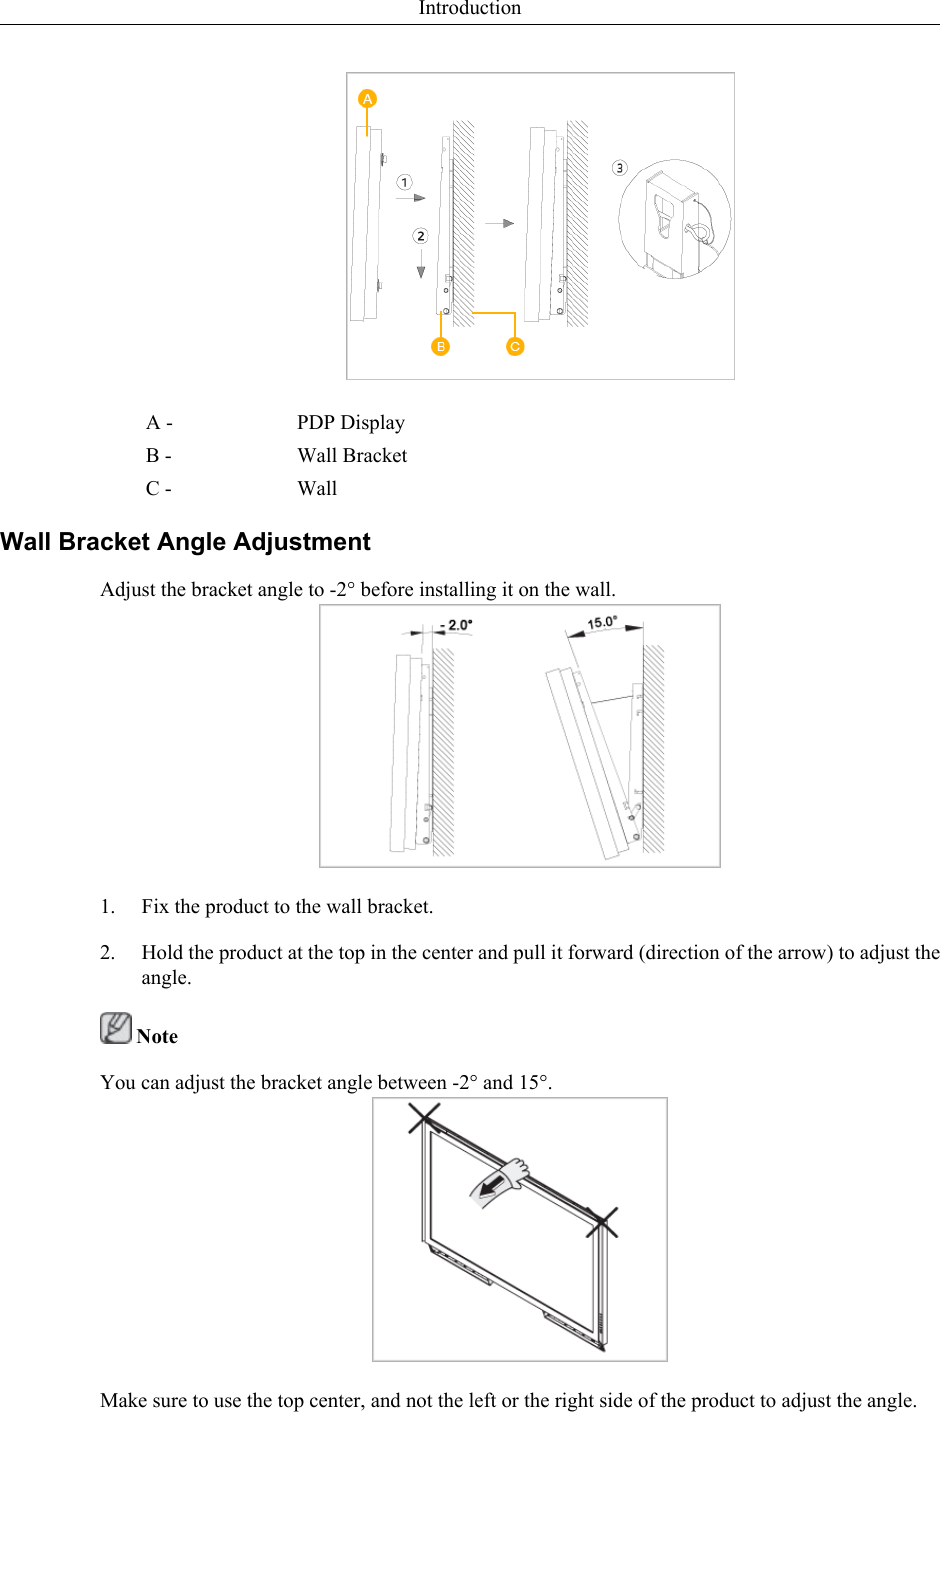 A - PDP DisplayB - Wall BracketC - WallWall Bracket Angle AdjustmentAdjust the bracket angle to -2° before installing it on the wall.1. Fix the product to the wall bracket.2. Hold the product at the top in the center and pull it forward (direction of the arrow) to adjust theangle. NoteYou can adjust the bracket angle between -2° and 15°.Make sure to use the top center, and not the left or the right side of the product to adjust the angle.Introduction